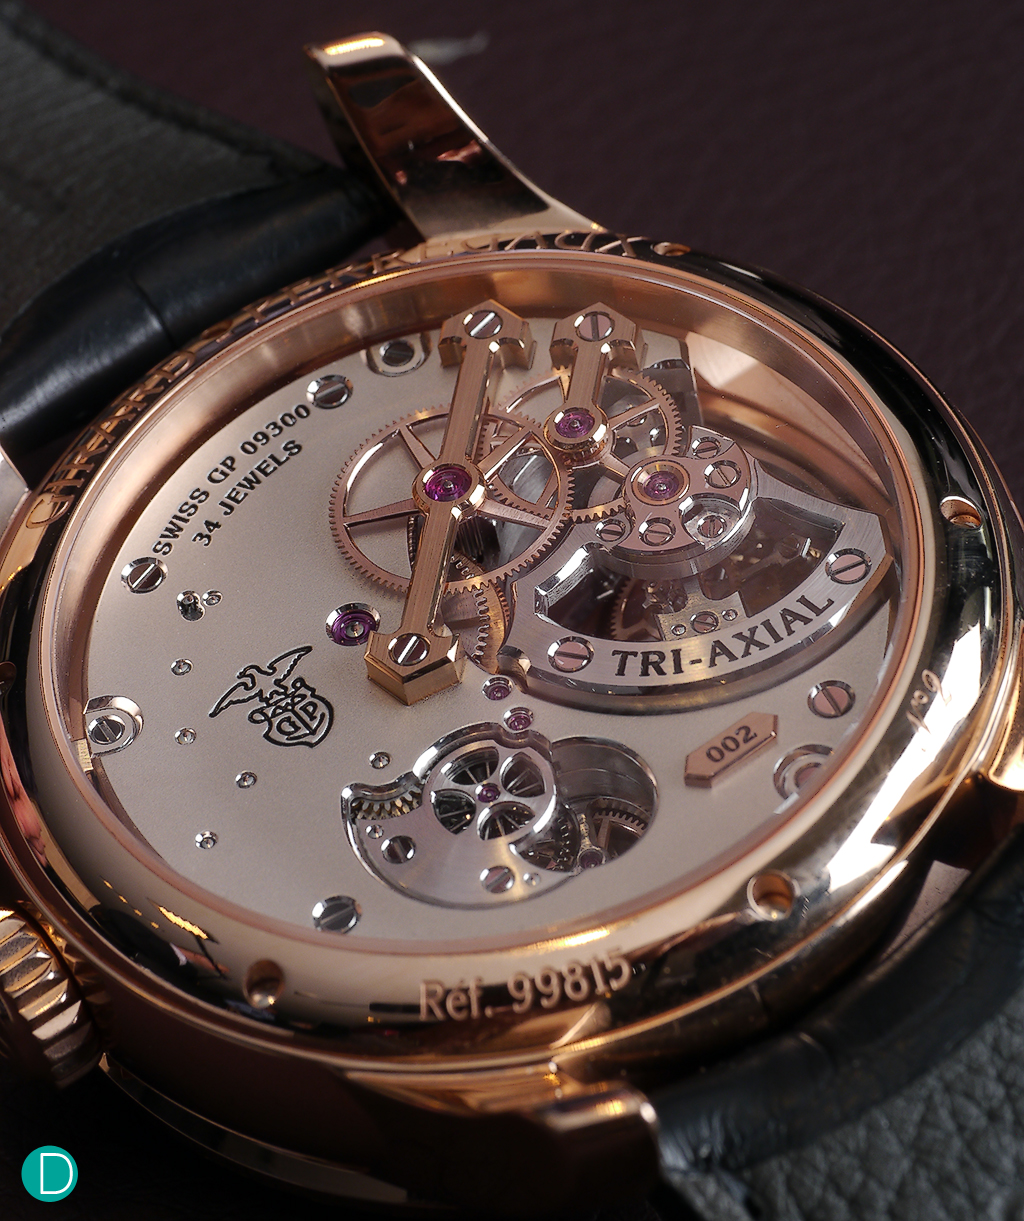 A caseback shot of the watch, featuring bridges with style cues from the iconic "Three Bridges" and the Eagle Motif. 